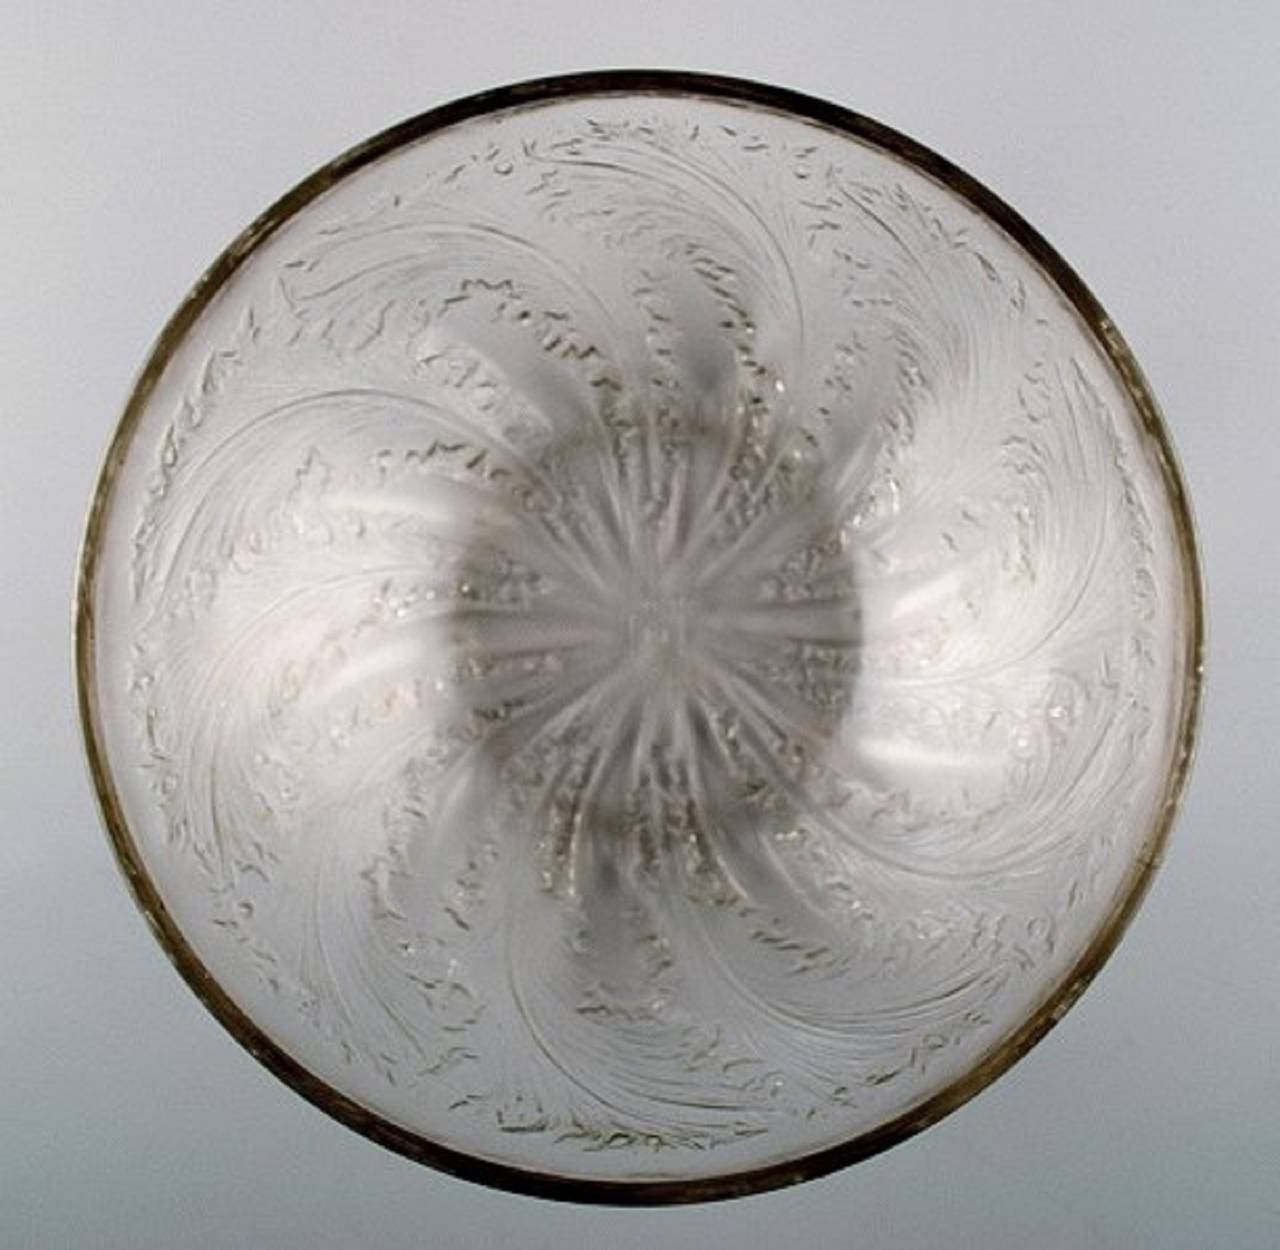 Early Art Deco Lalique art glass bowl.
Signed: France.
Size: 9 cm height, 24 cm in diameter.
In perfect condition.